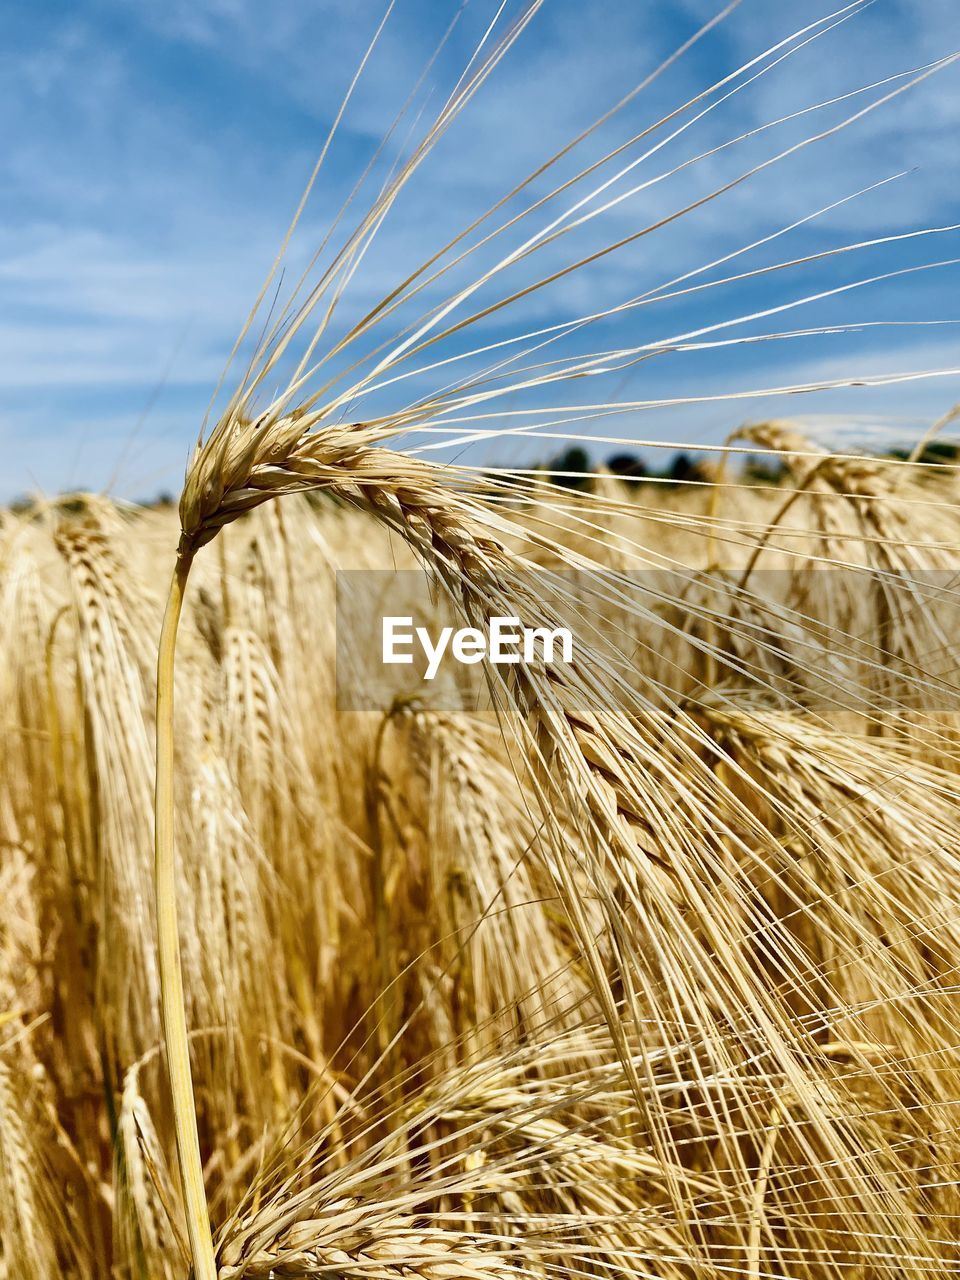 agriculture, cereal plant, crop, landscape, rural scene, food, sky, plant, field, land, nature, wheat, barley, farm, rye, food grain, growth, cloud, no people, environment, harvesting, emmer, gold, summer, beauty in nature, outdoors, triticale, day, hordeum, einkorn wheat, scenics - nature, close-up, cereal, straw, sunlight, tranquility, corn, food and drink, dry